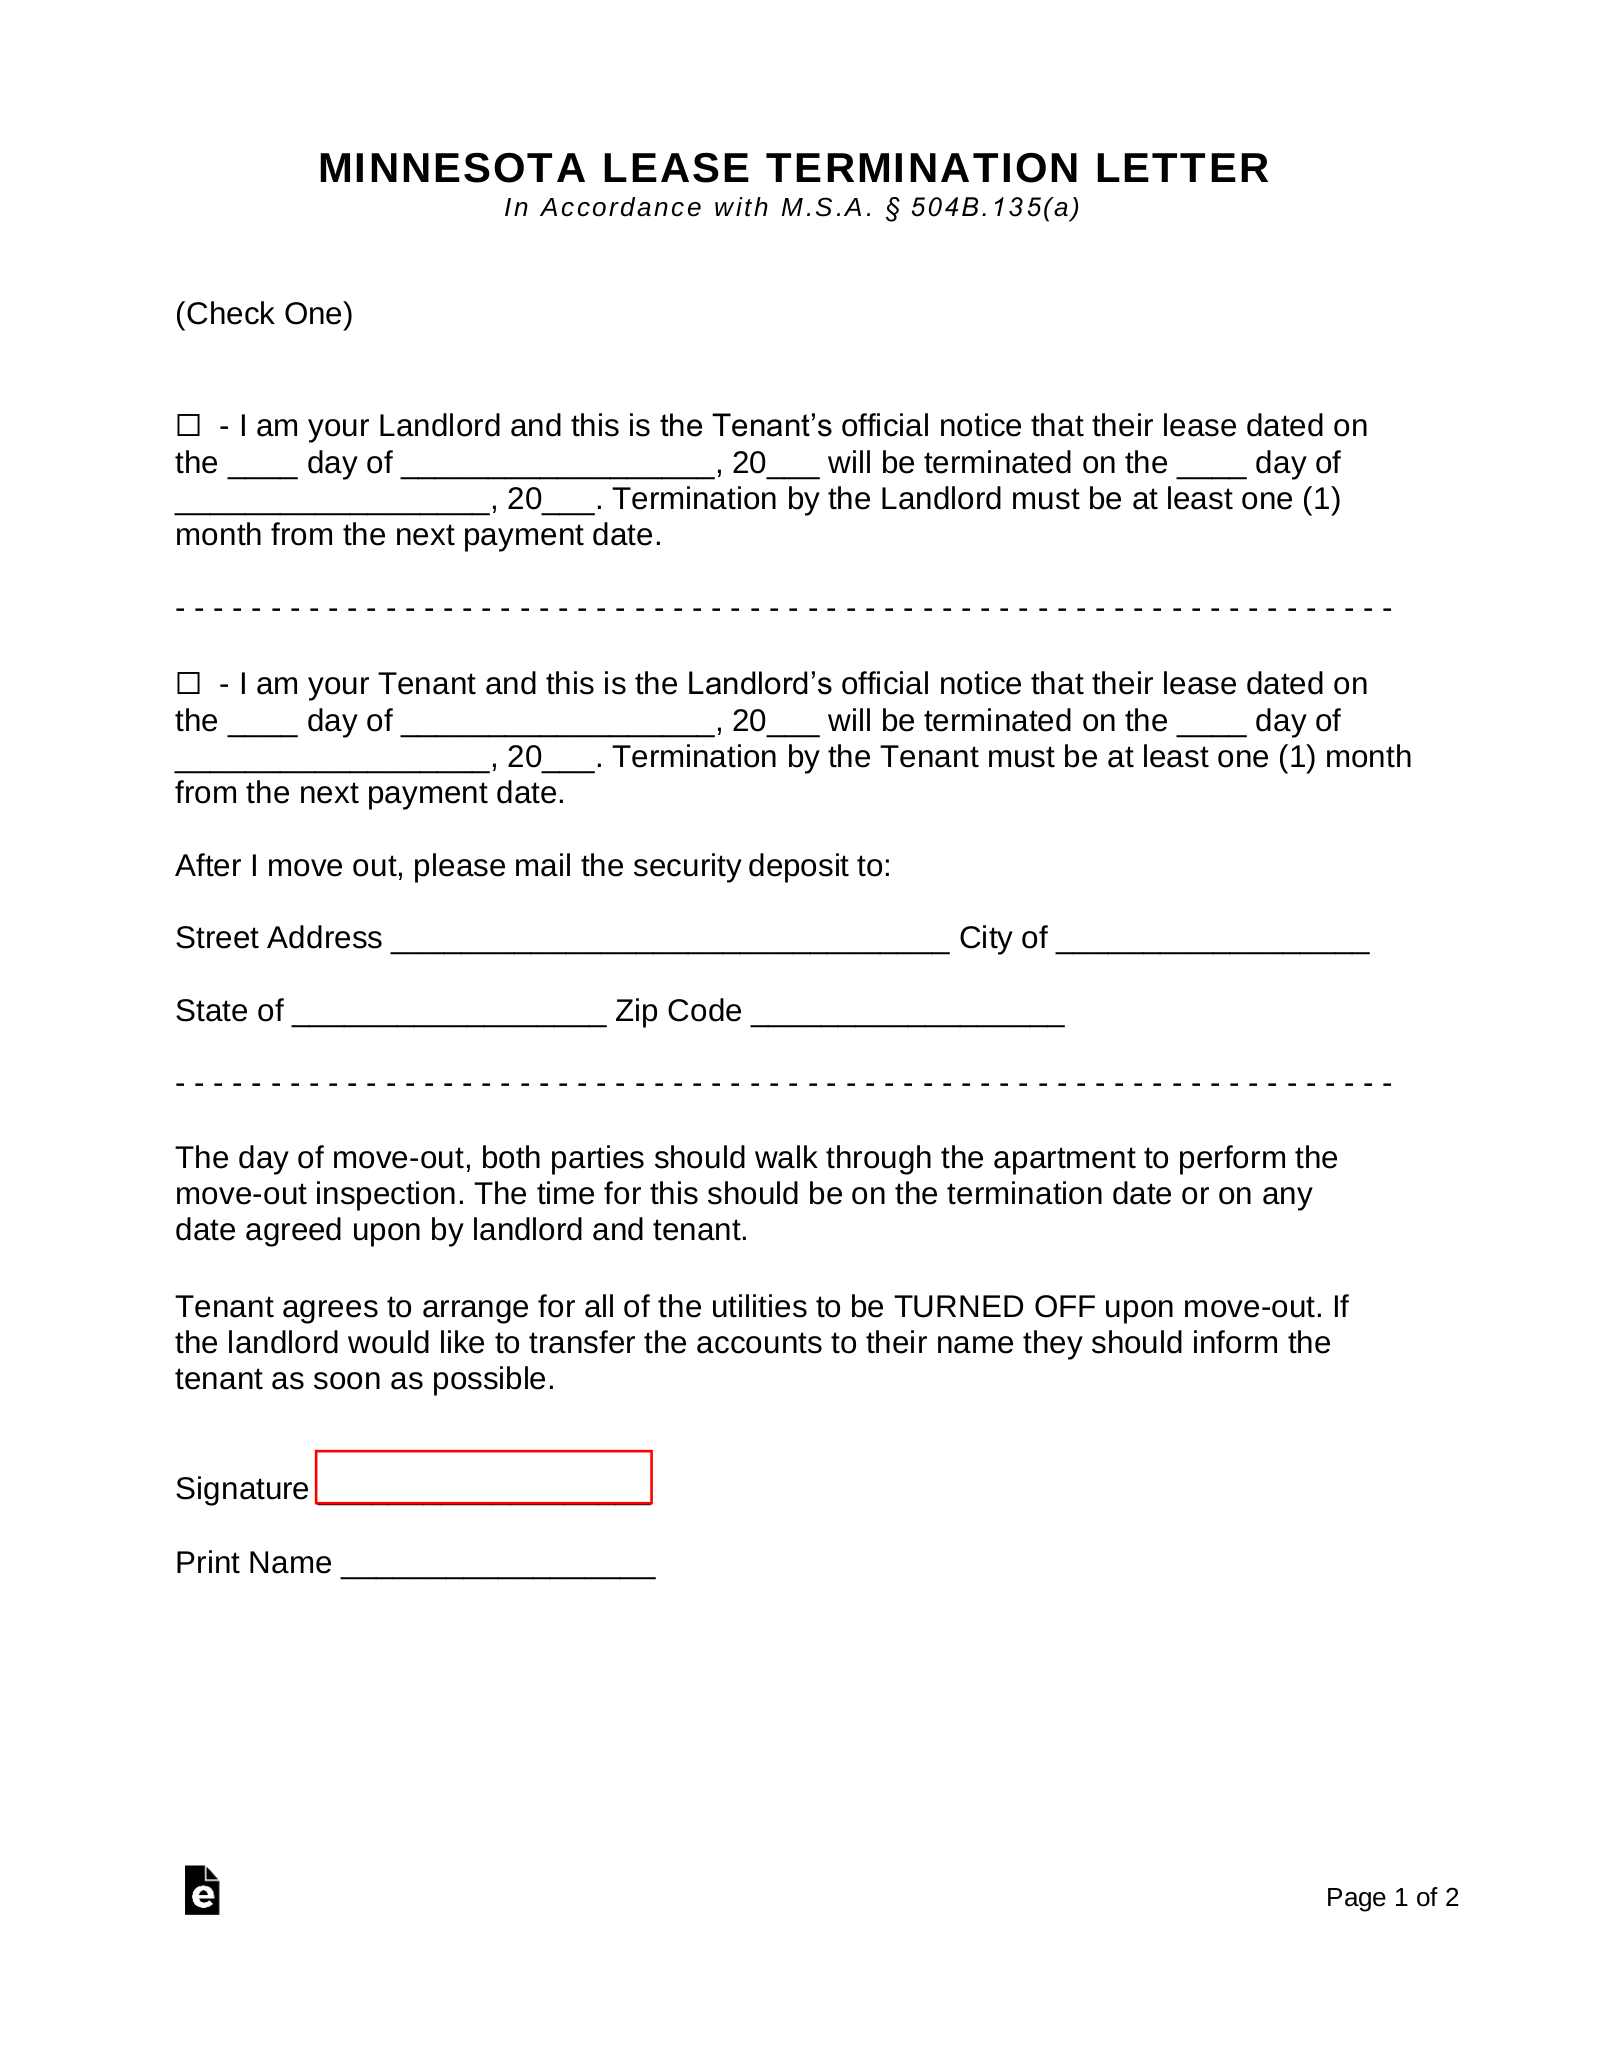 Termination Of Lease Letter From Landlord from eforms.com